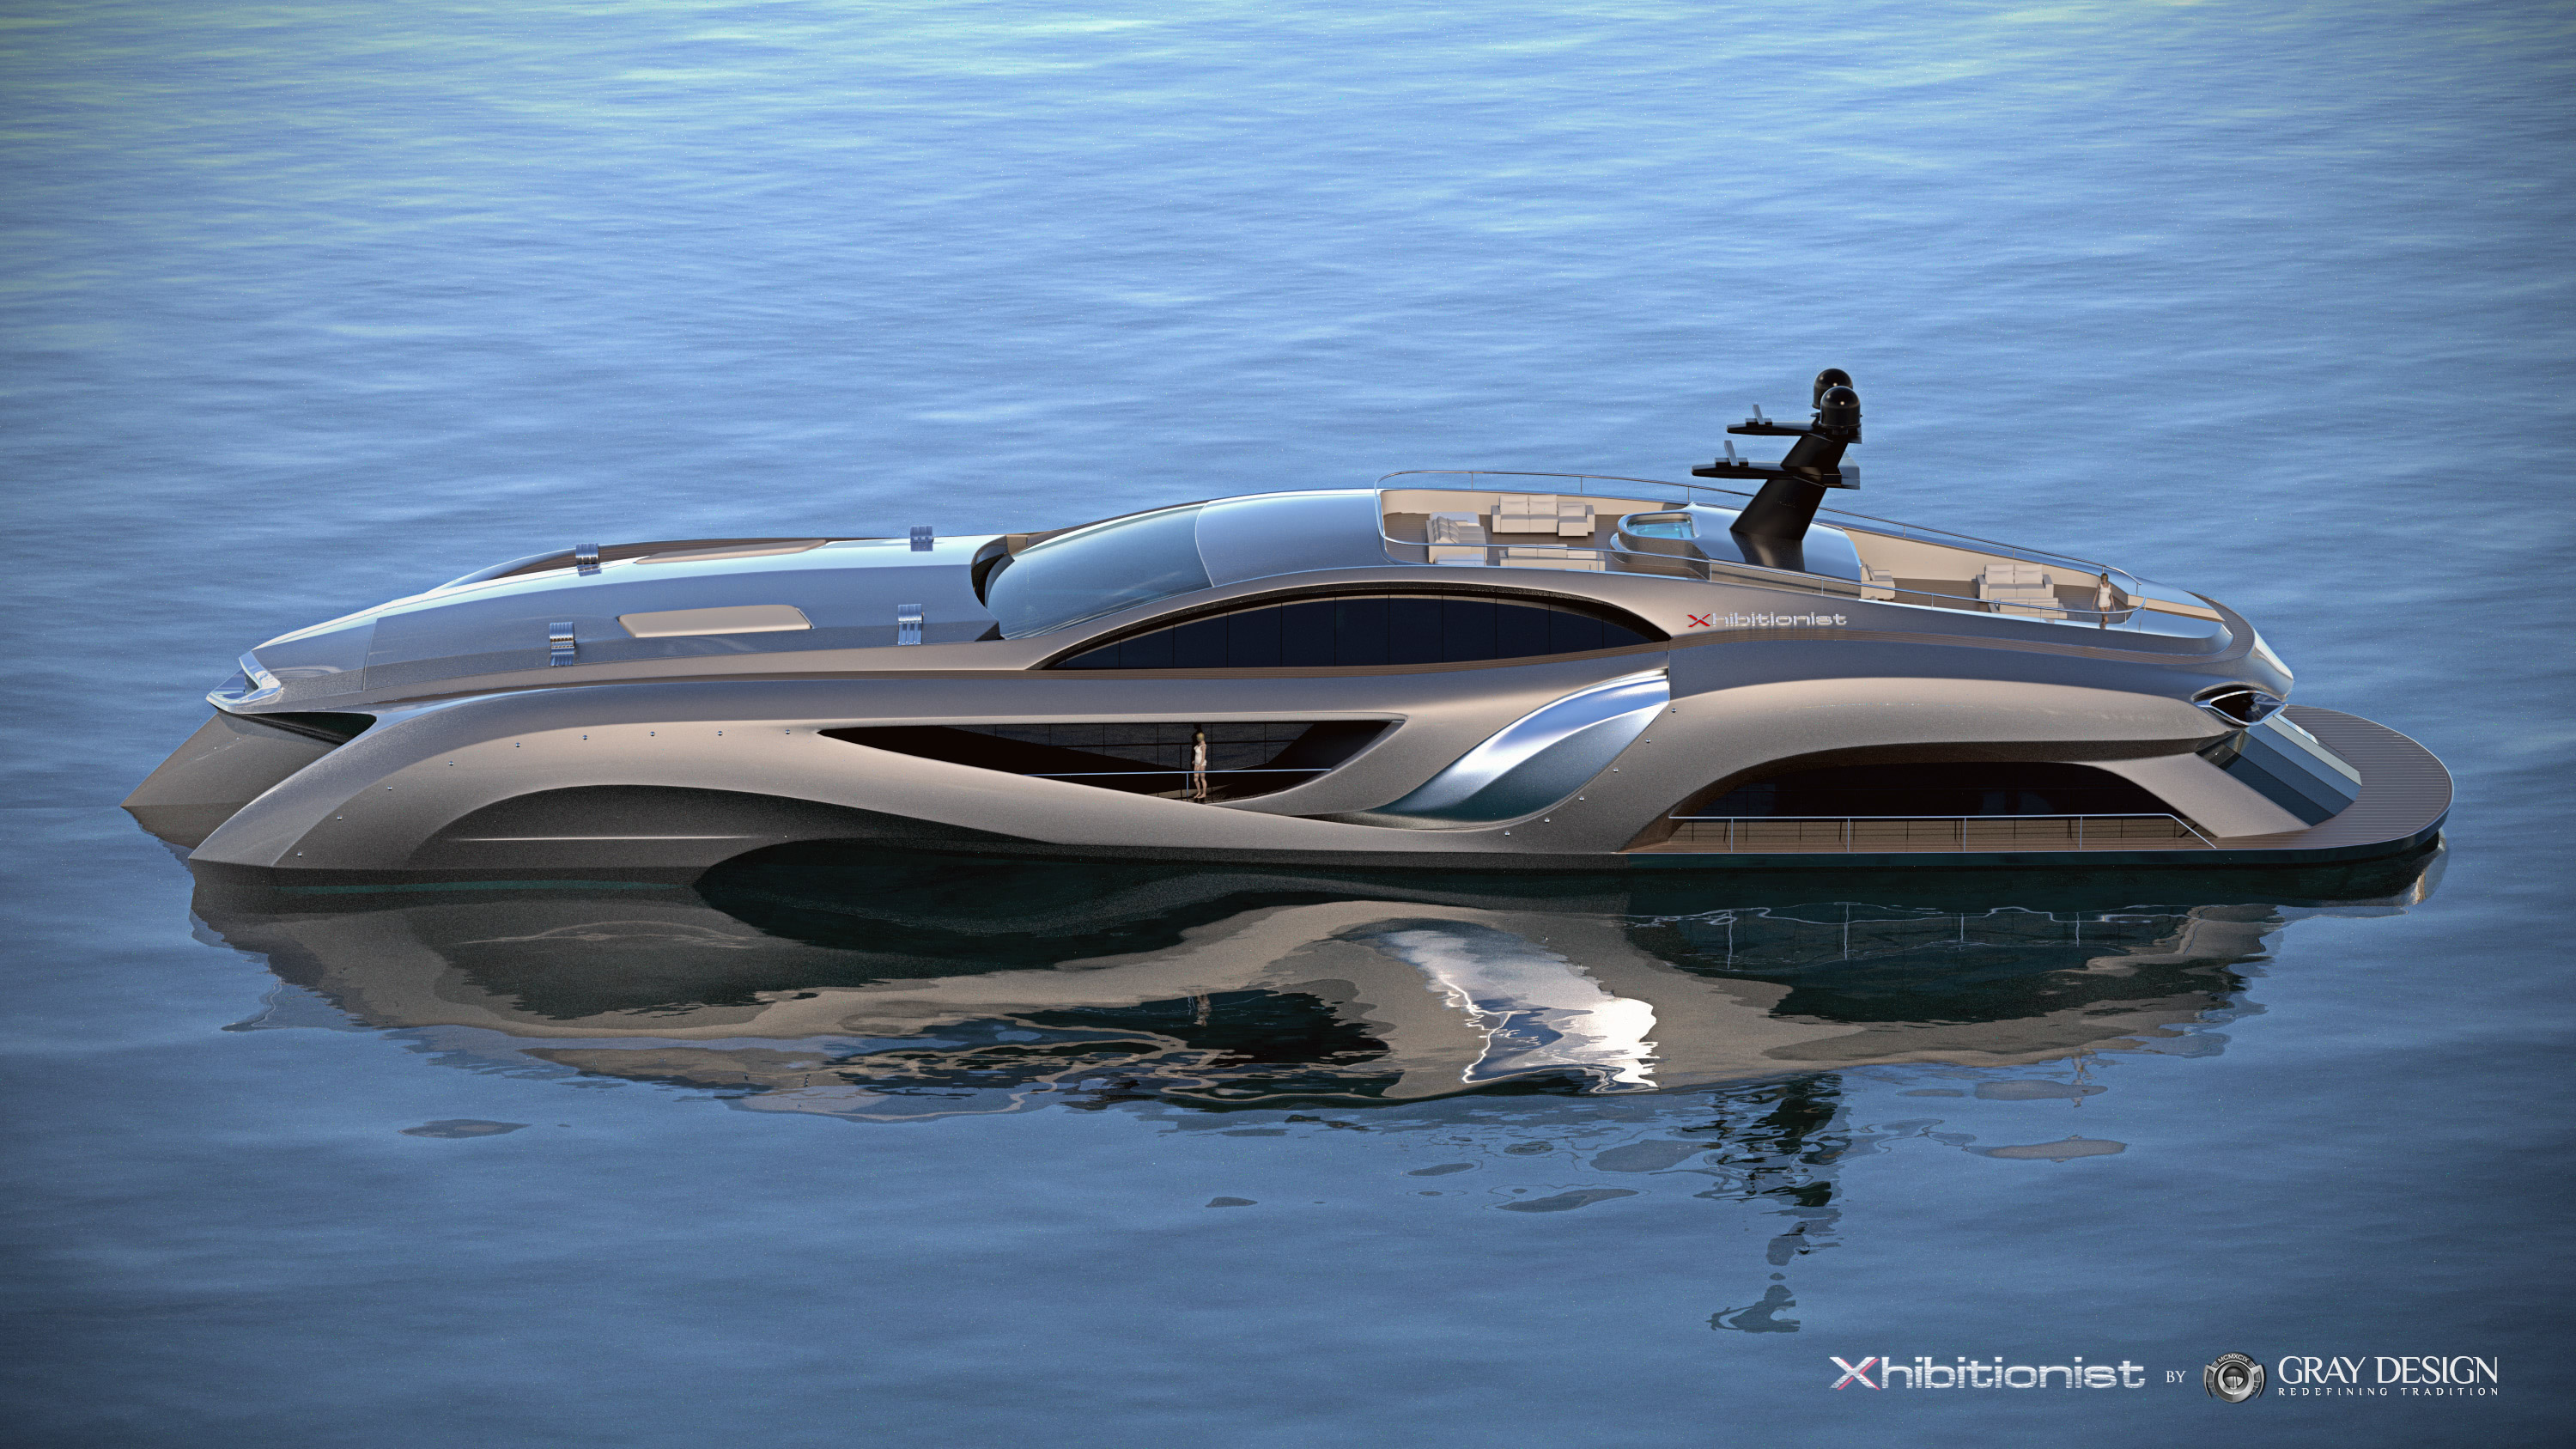 Checkout this quite deep boat you gotta go crazy for this beast.